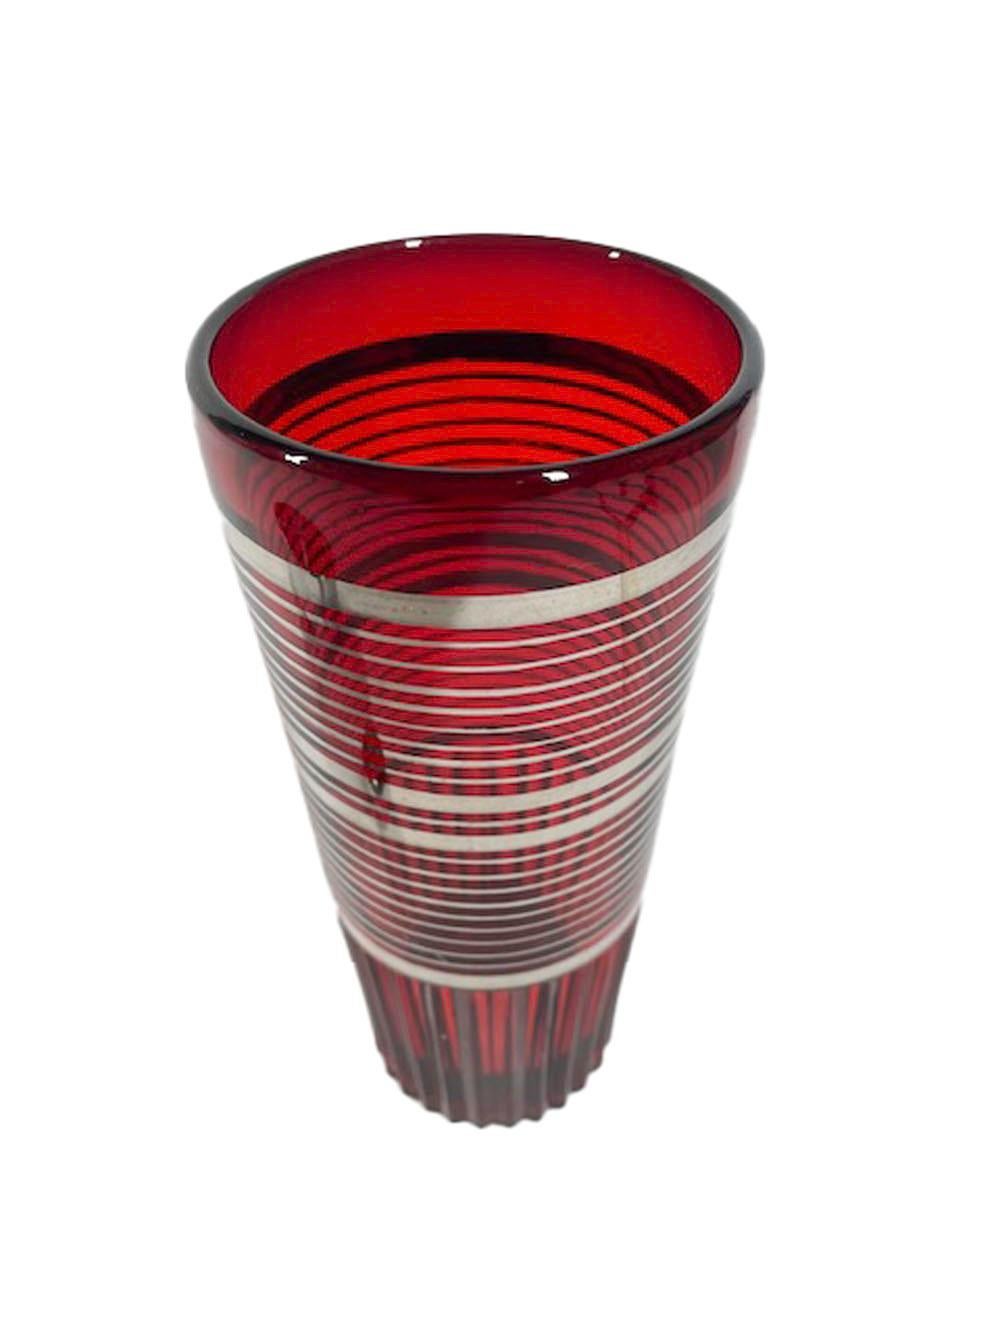 Art Deco, Paden City Glass Cocktail Shaker in the Glades Pattern, Ruby W/Silver 1